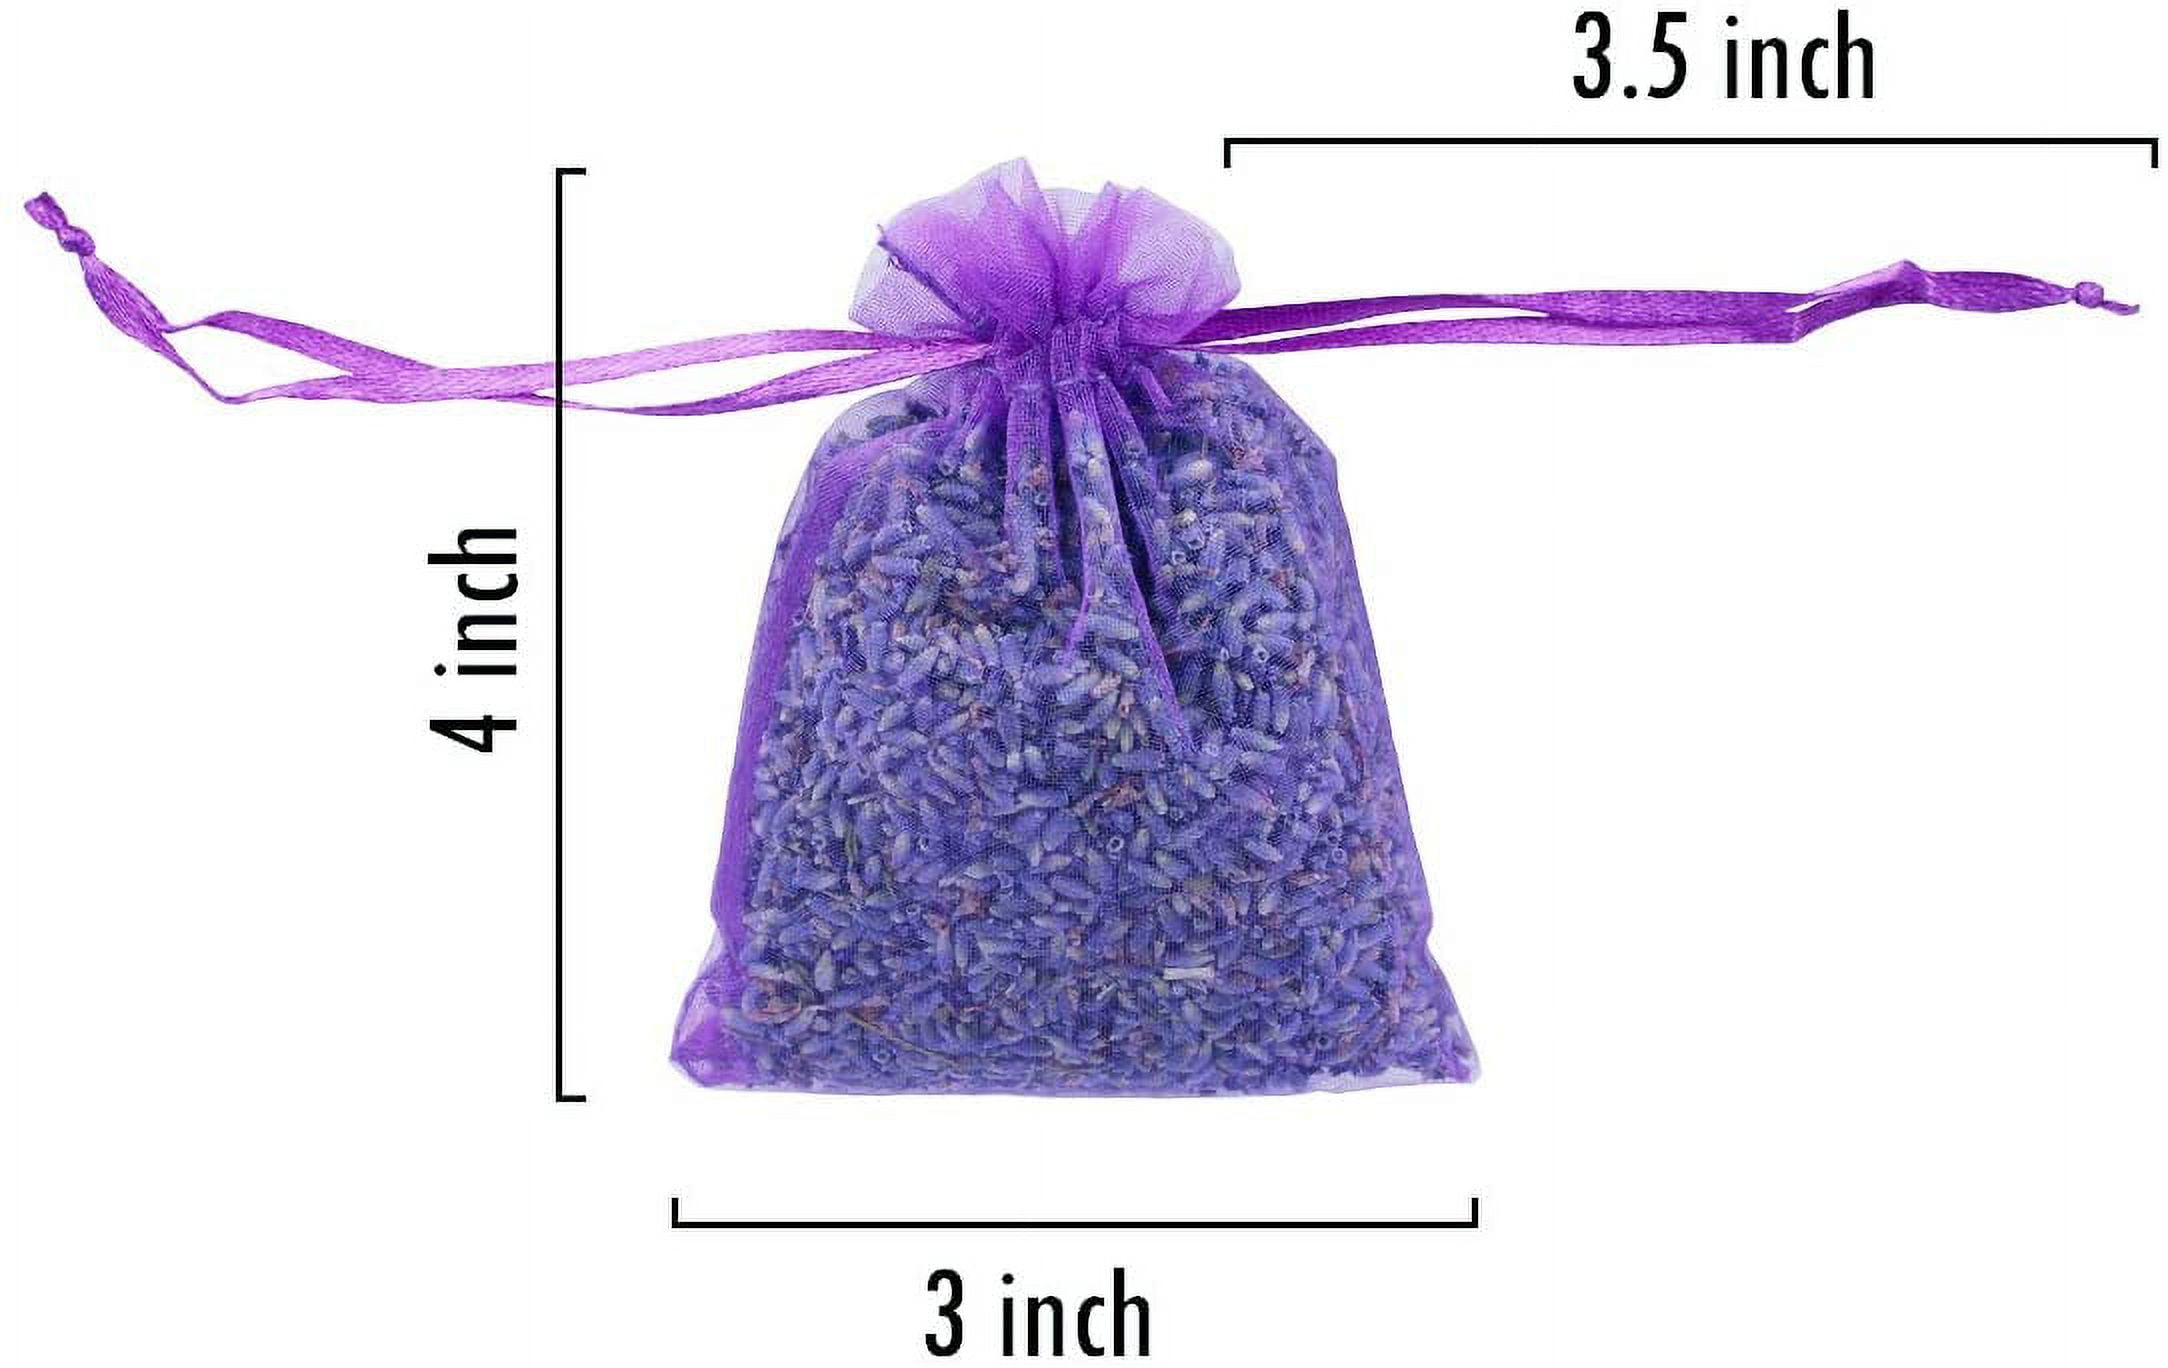  VILLCASE 30pcs air fresheners Lavender Sachet Bags Natural  Lavender Bags Bracelet Bags mesh Bags Lavender Bags for wardrobes Lavender  Pouch Bags Closet Drawers car Empty Candy Baby Clothing : Home 